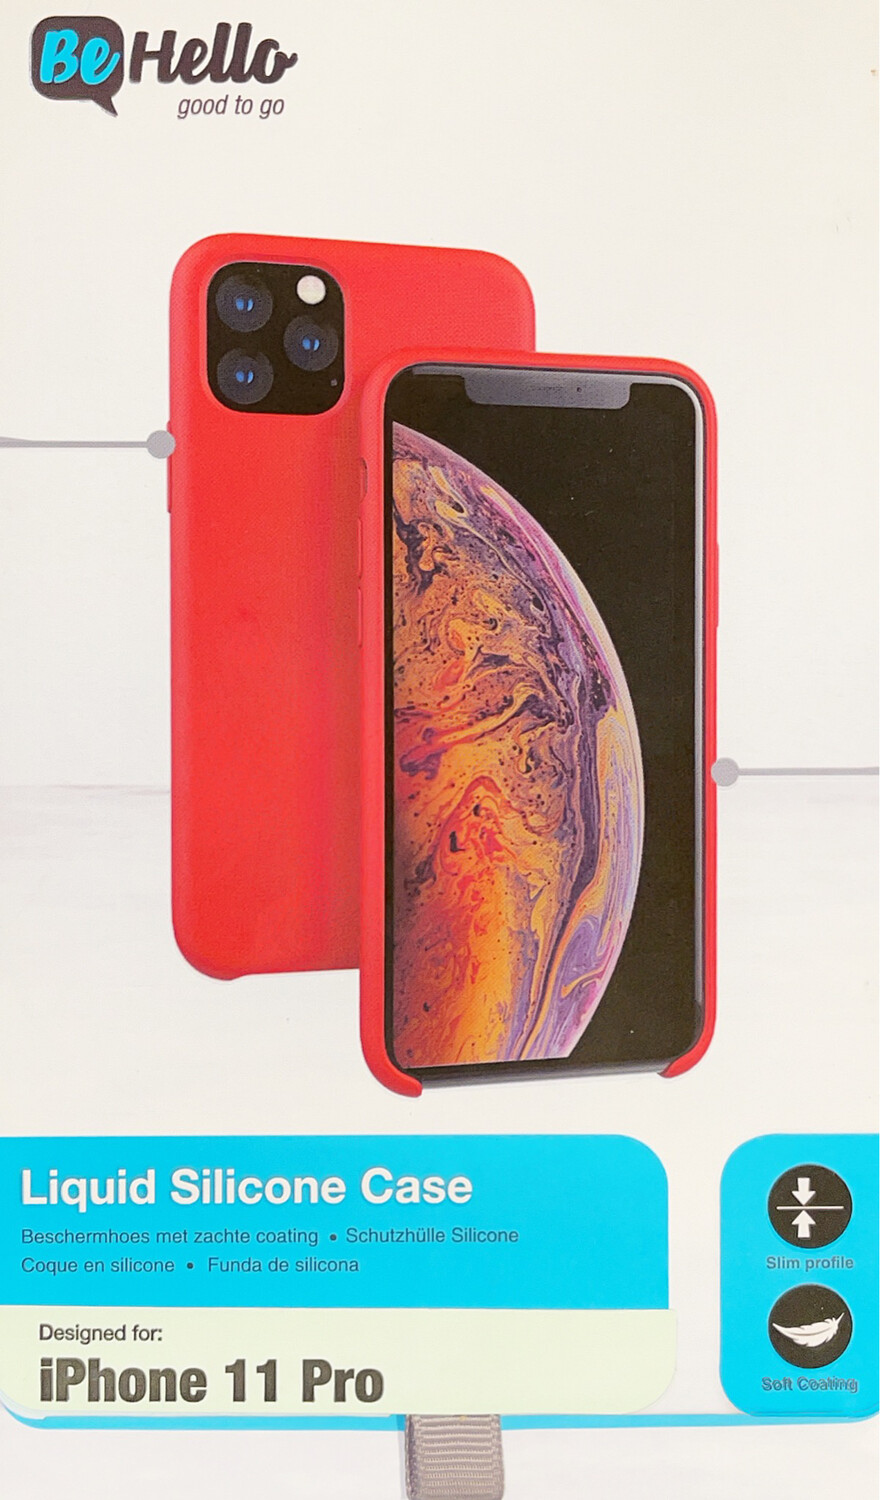 Be Hello iPhone XI Liquid Silicone Case Red